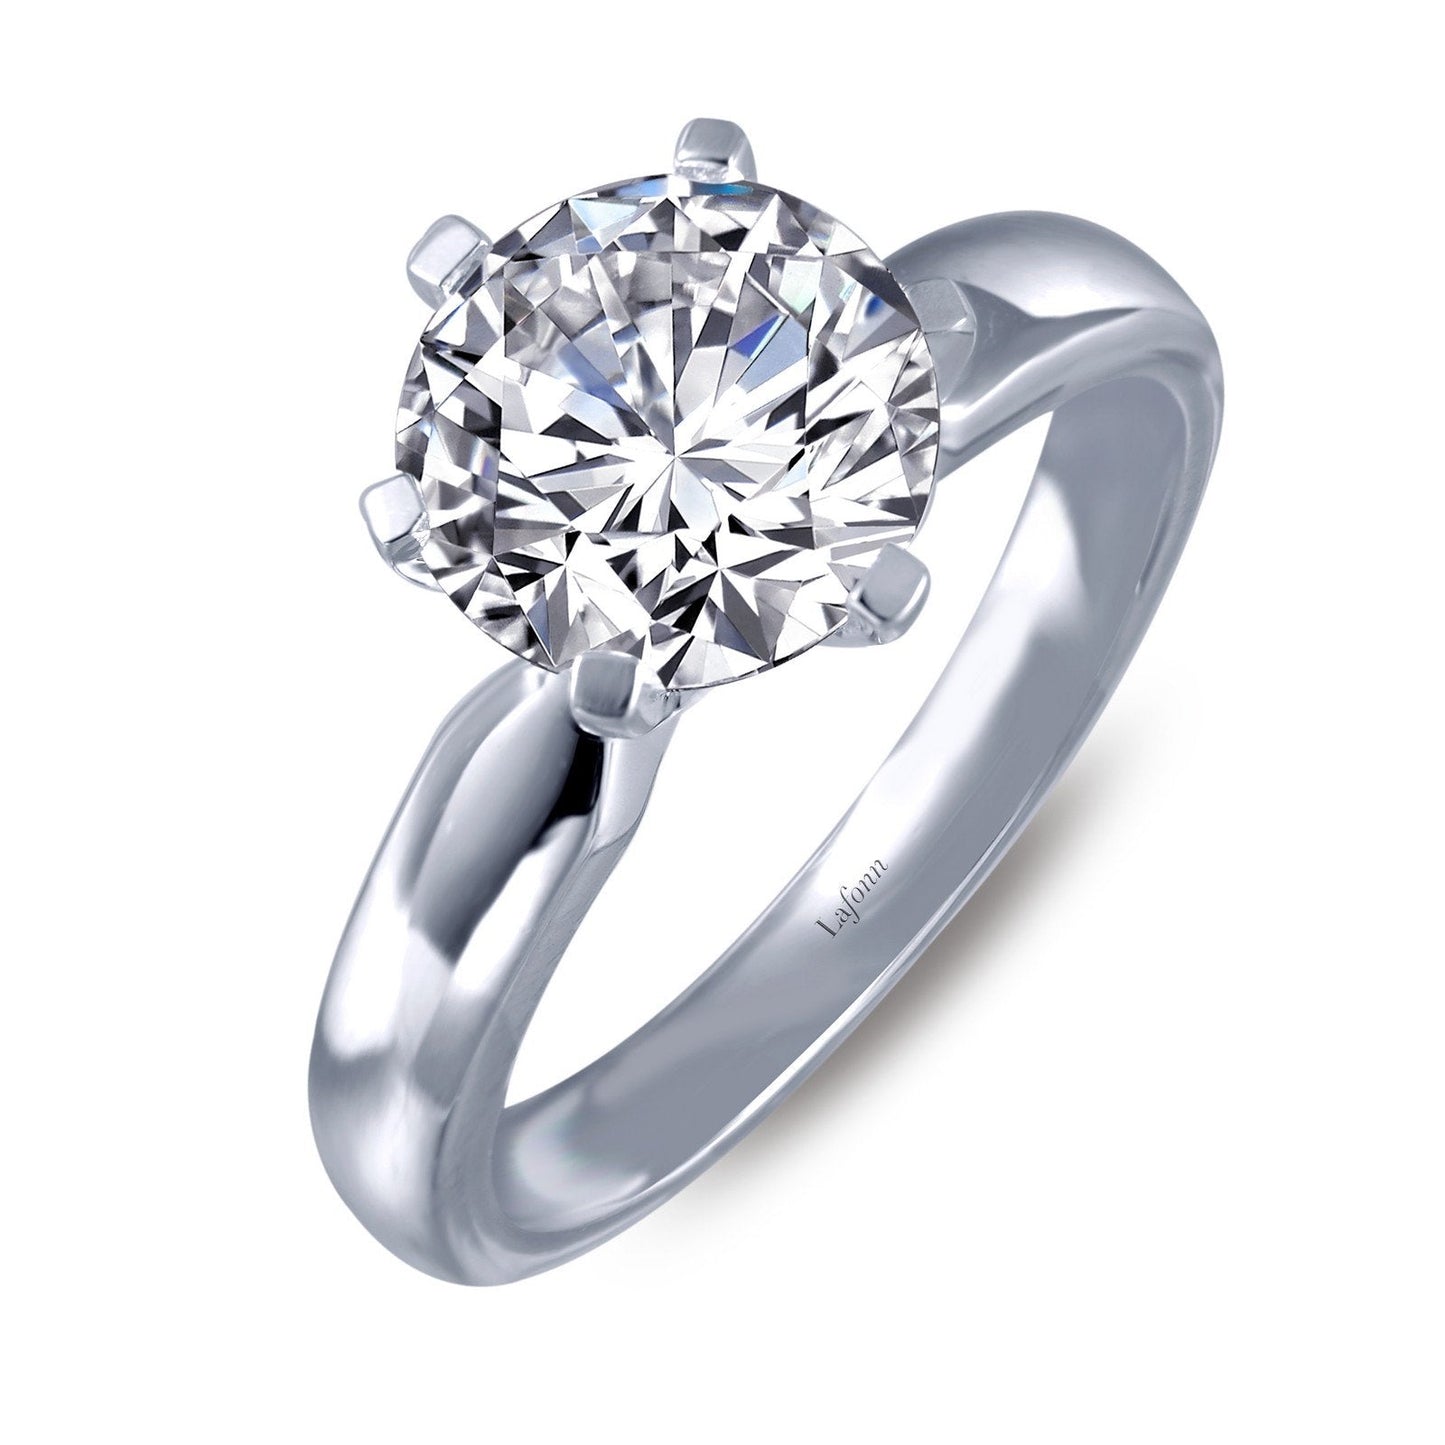 Lafonn 2.04 CTW Solitaire Ring Simulated Diamond RINGS Size 10 Platinum 2.04 CTS 